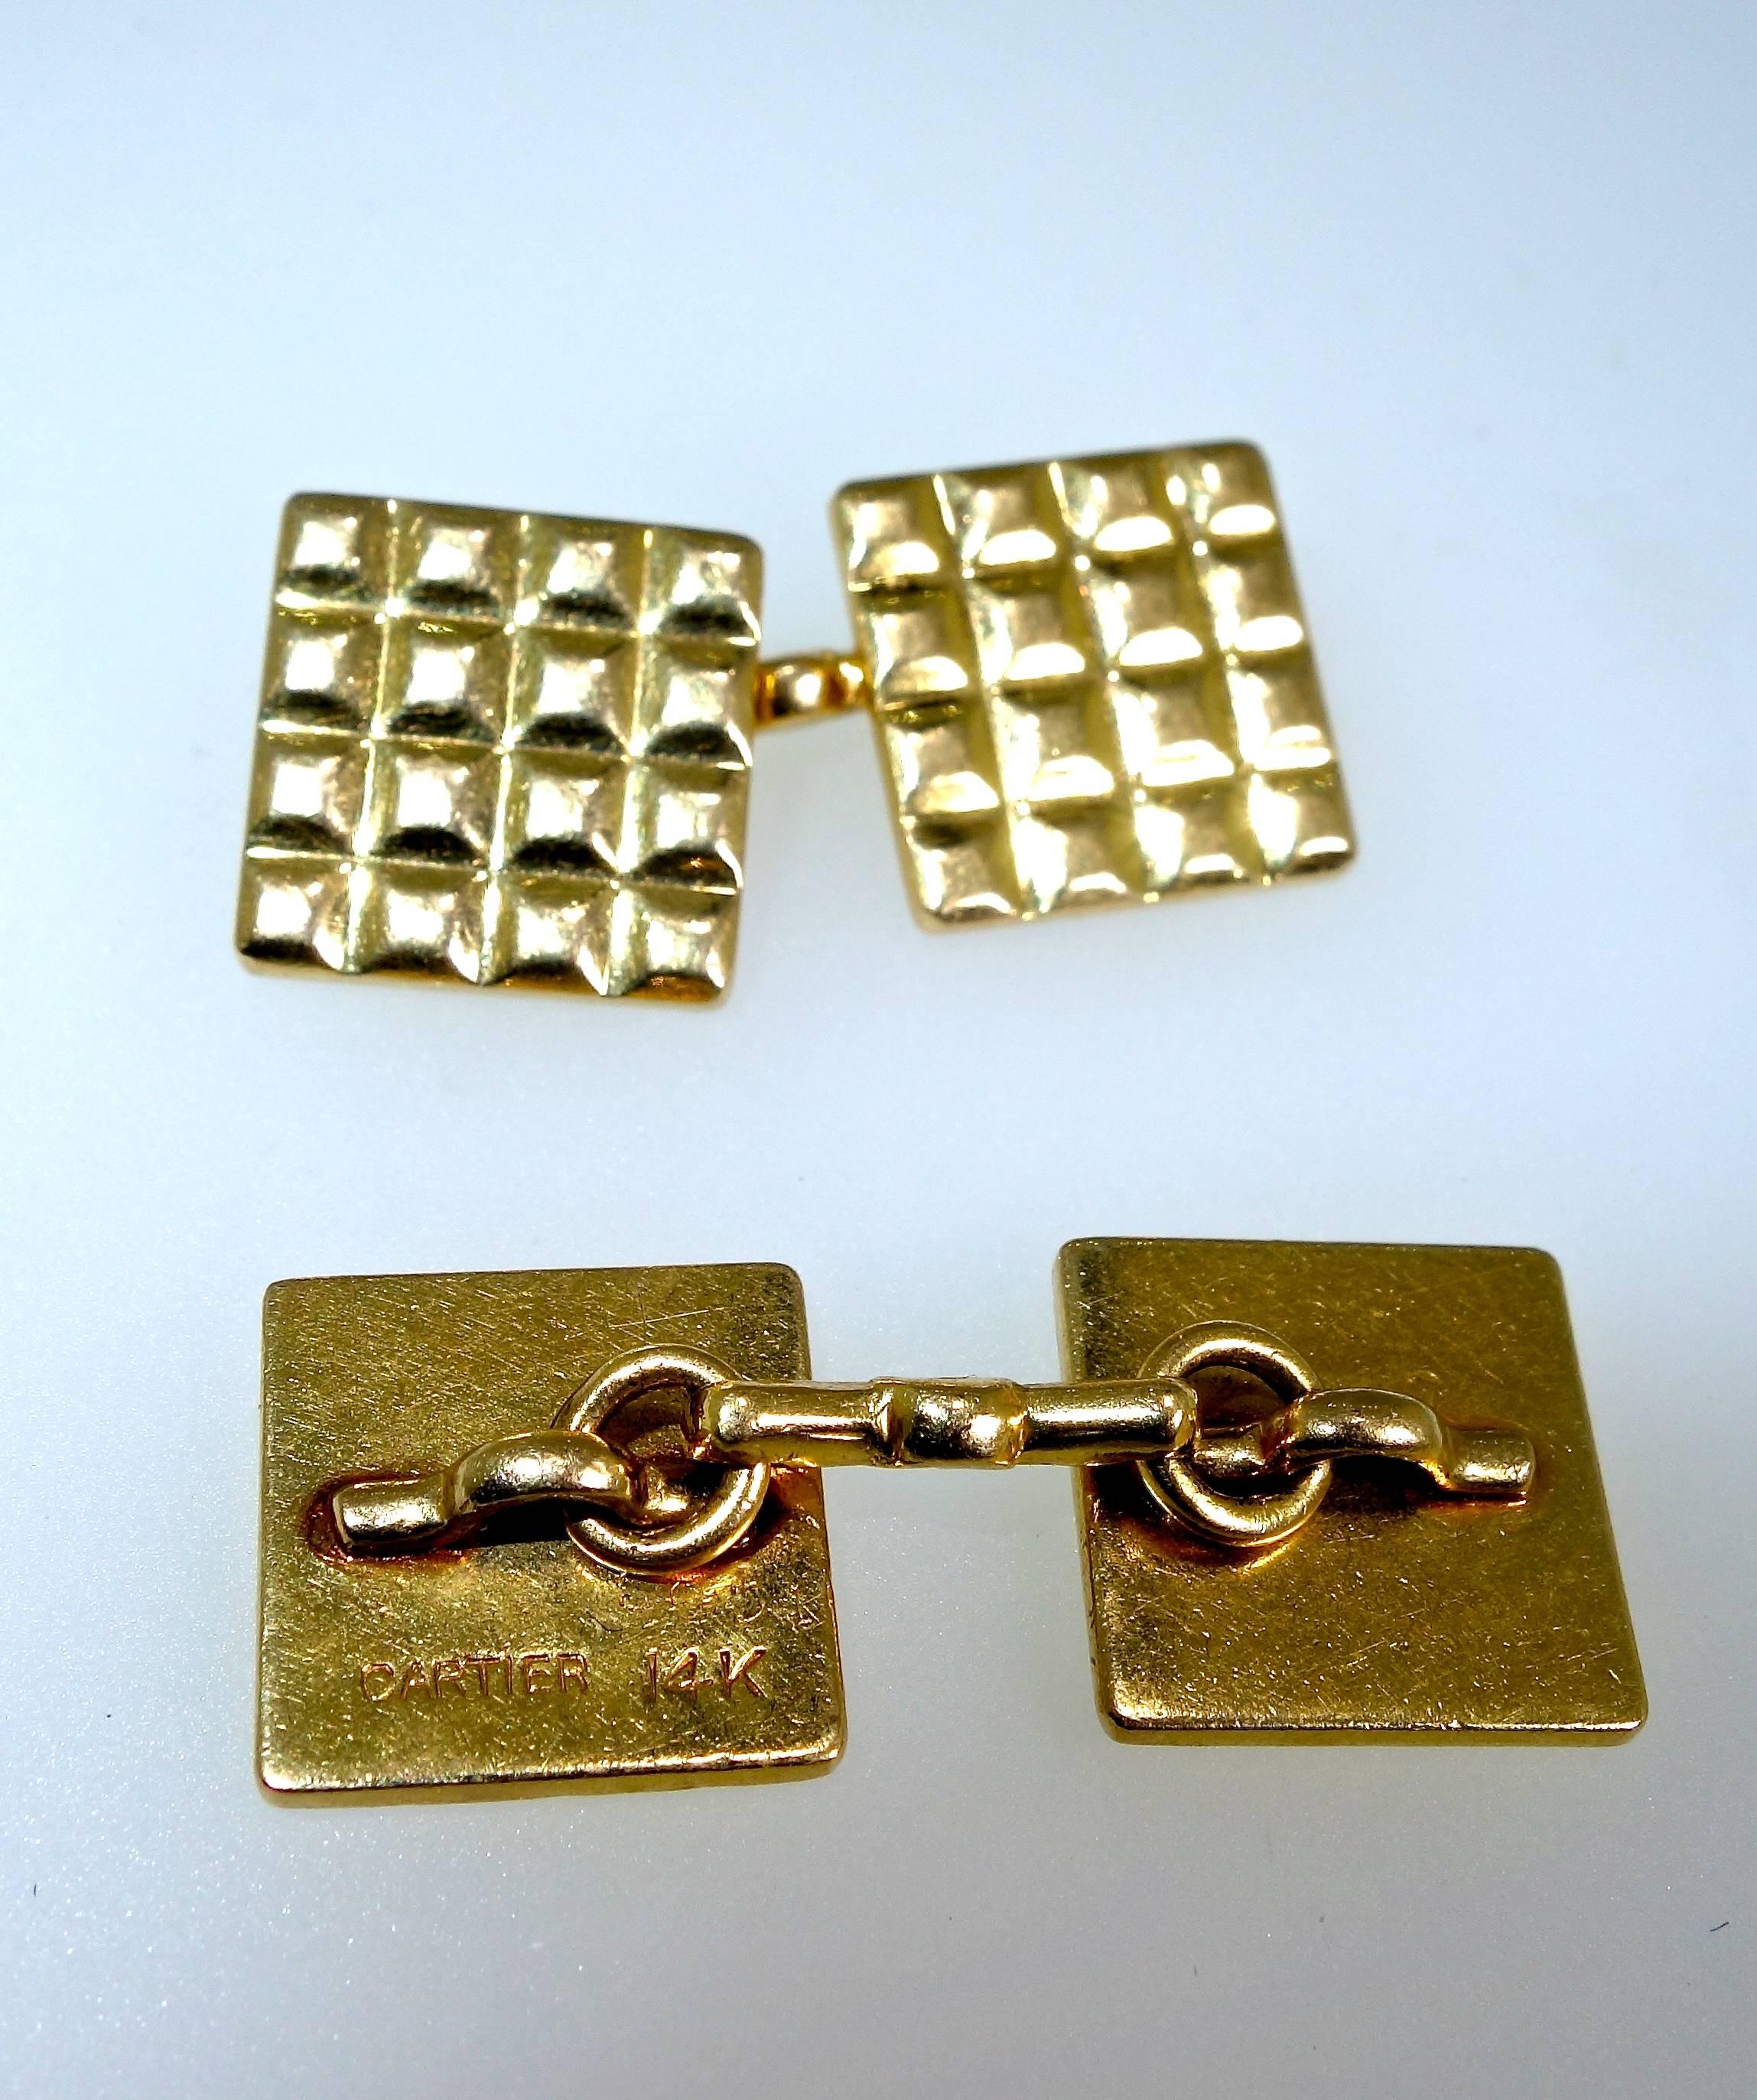 These back to back gold cufflinks are .50 inches square and weigh 10.07 grams.  They are a classic look and well made by Cartier.